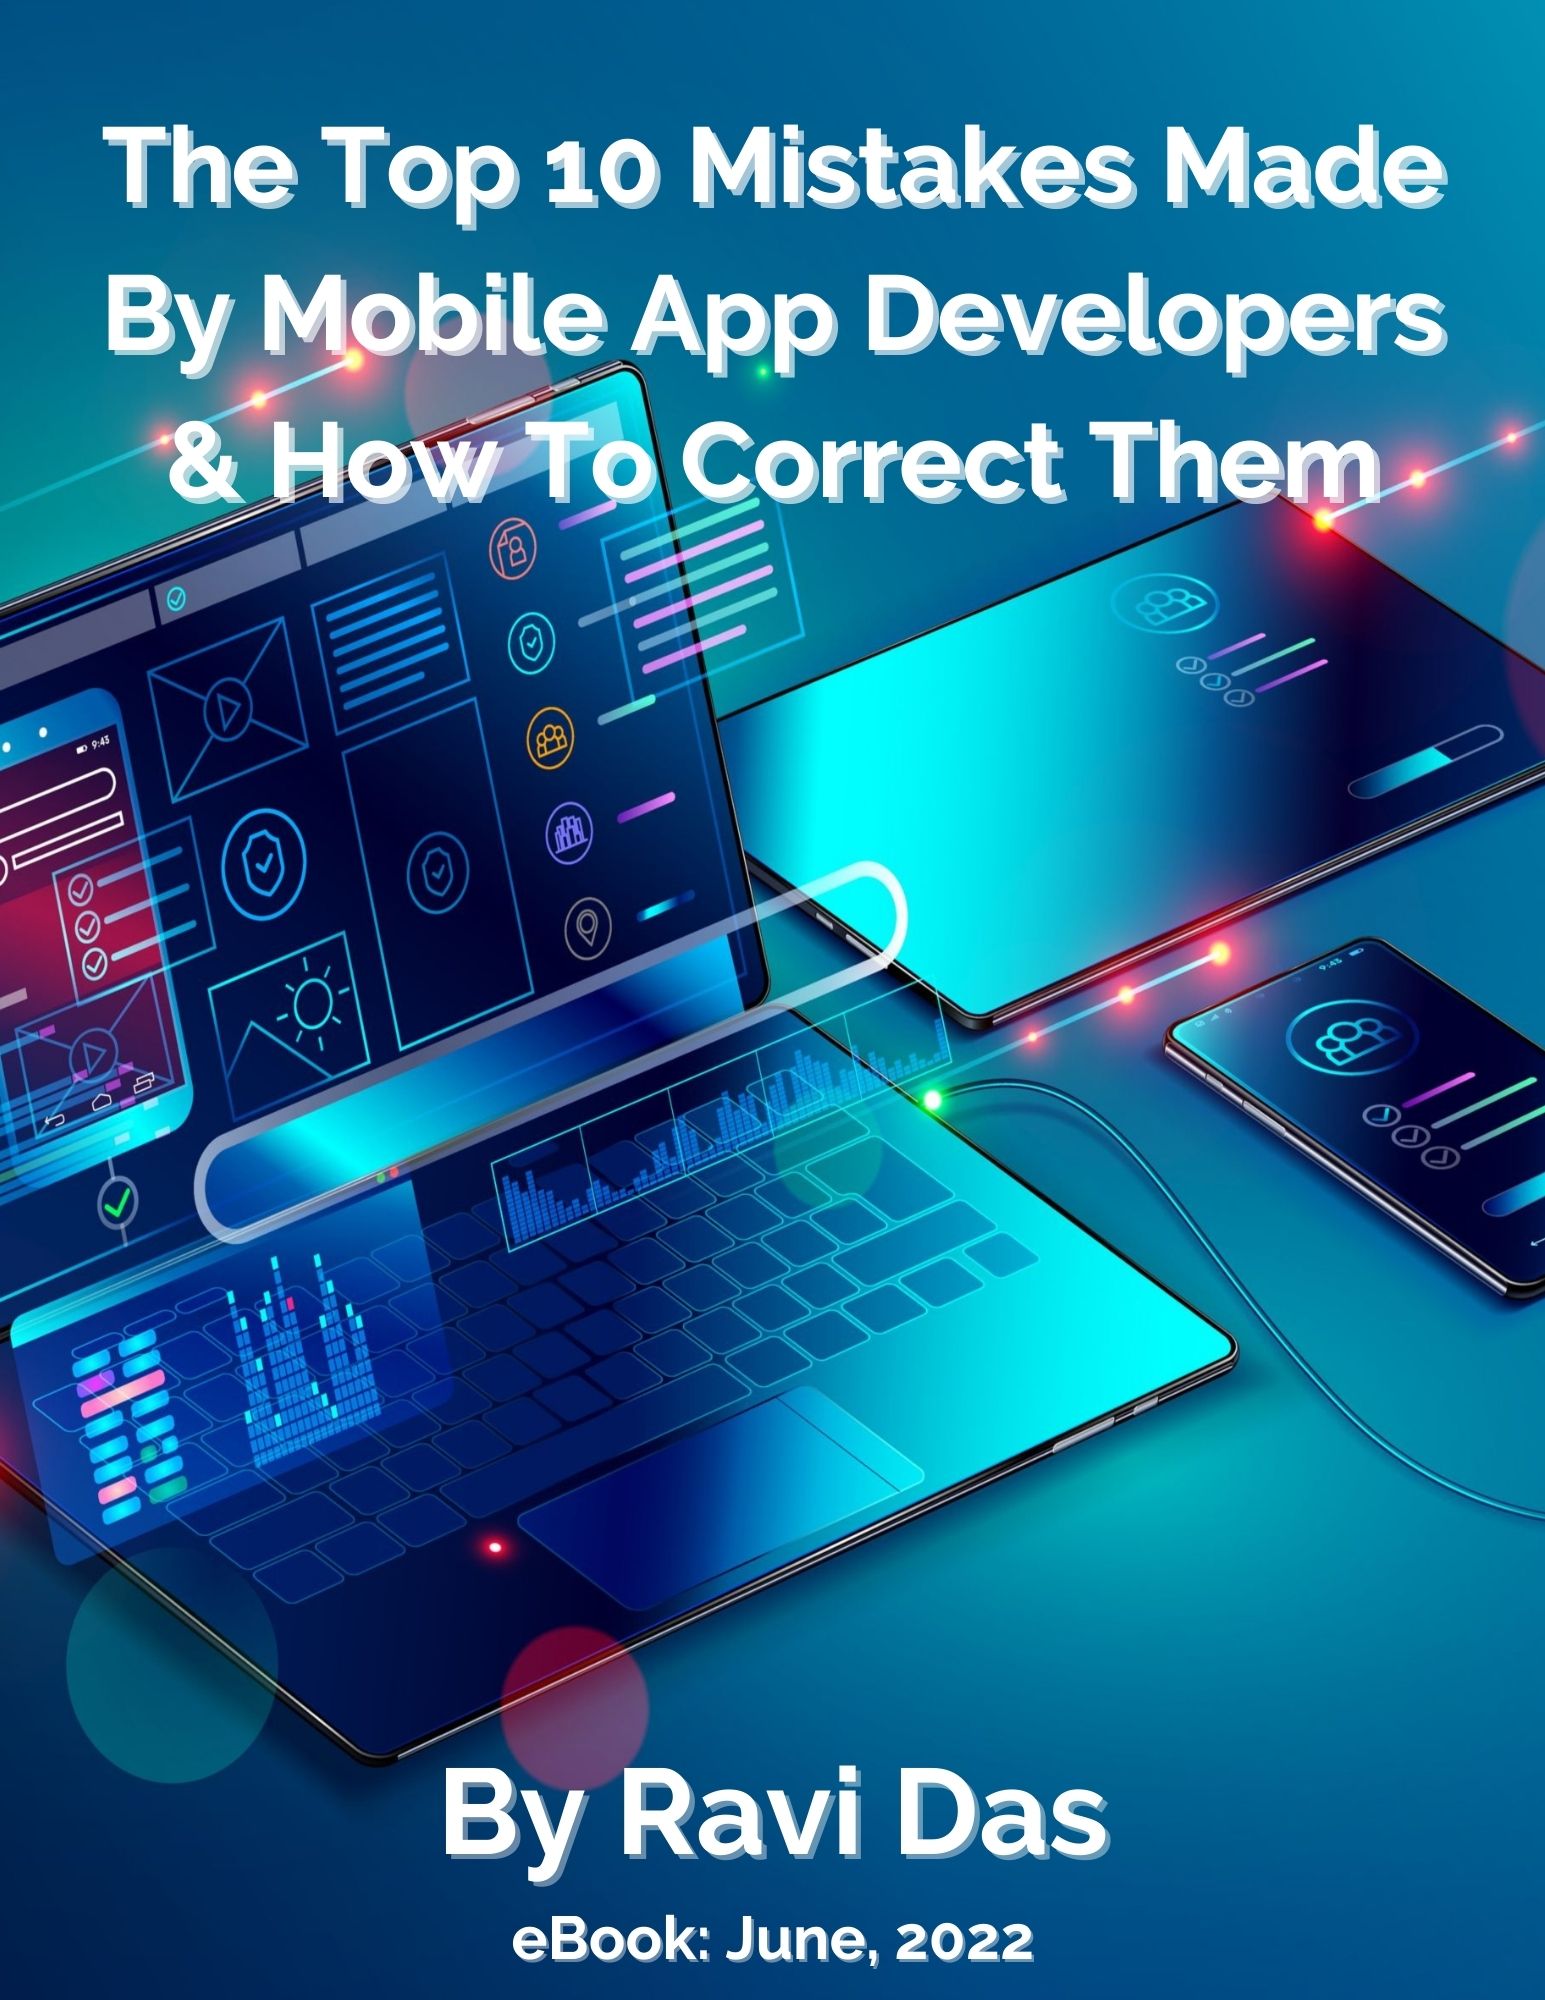 The Top 10 Mistakes Made by Mobile App Developers e-Book